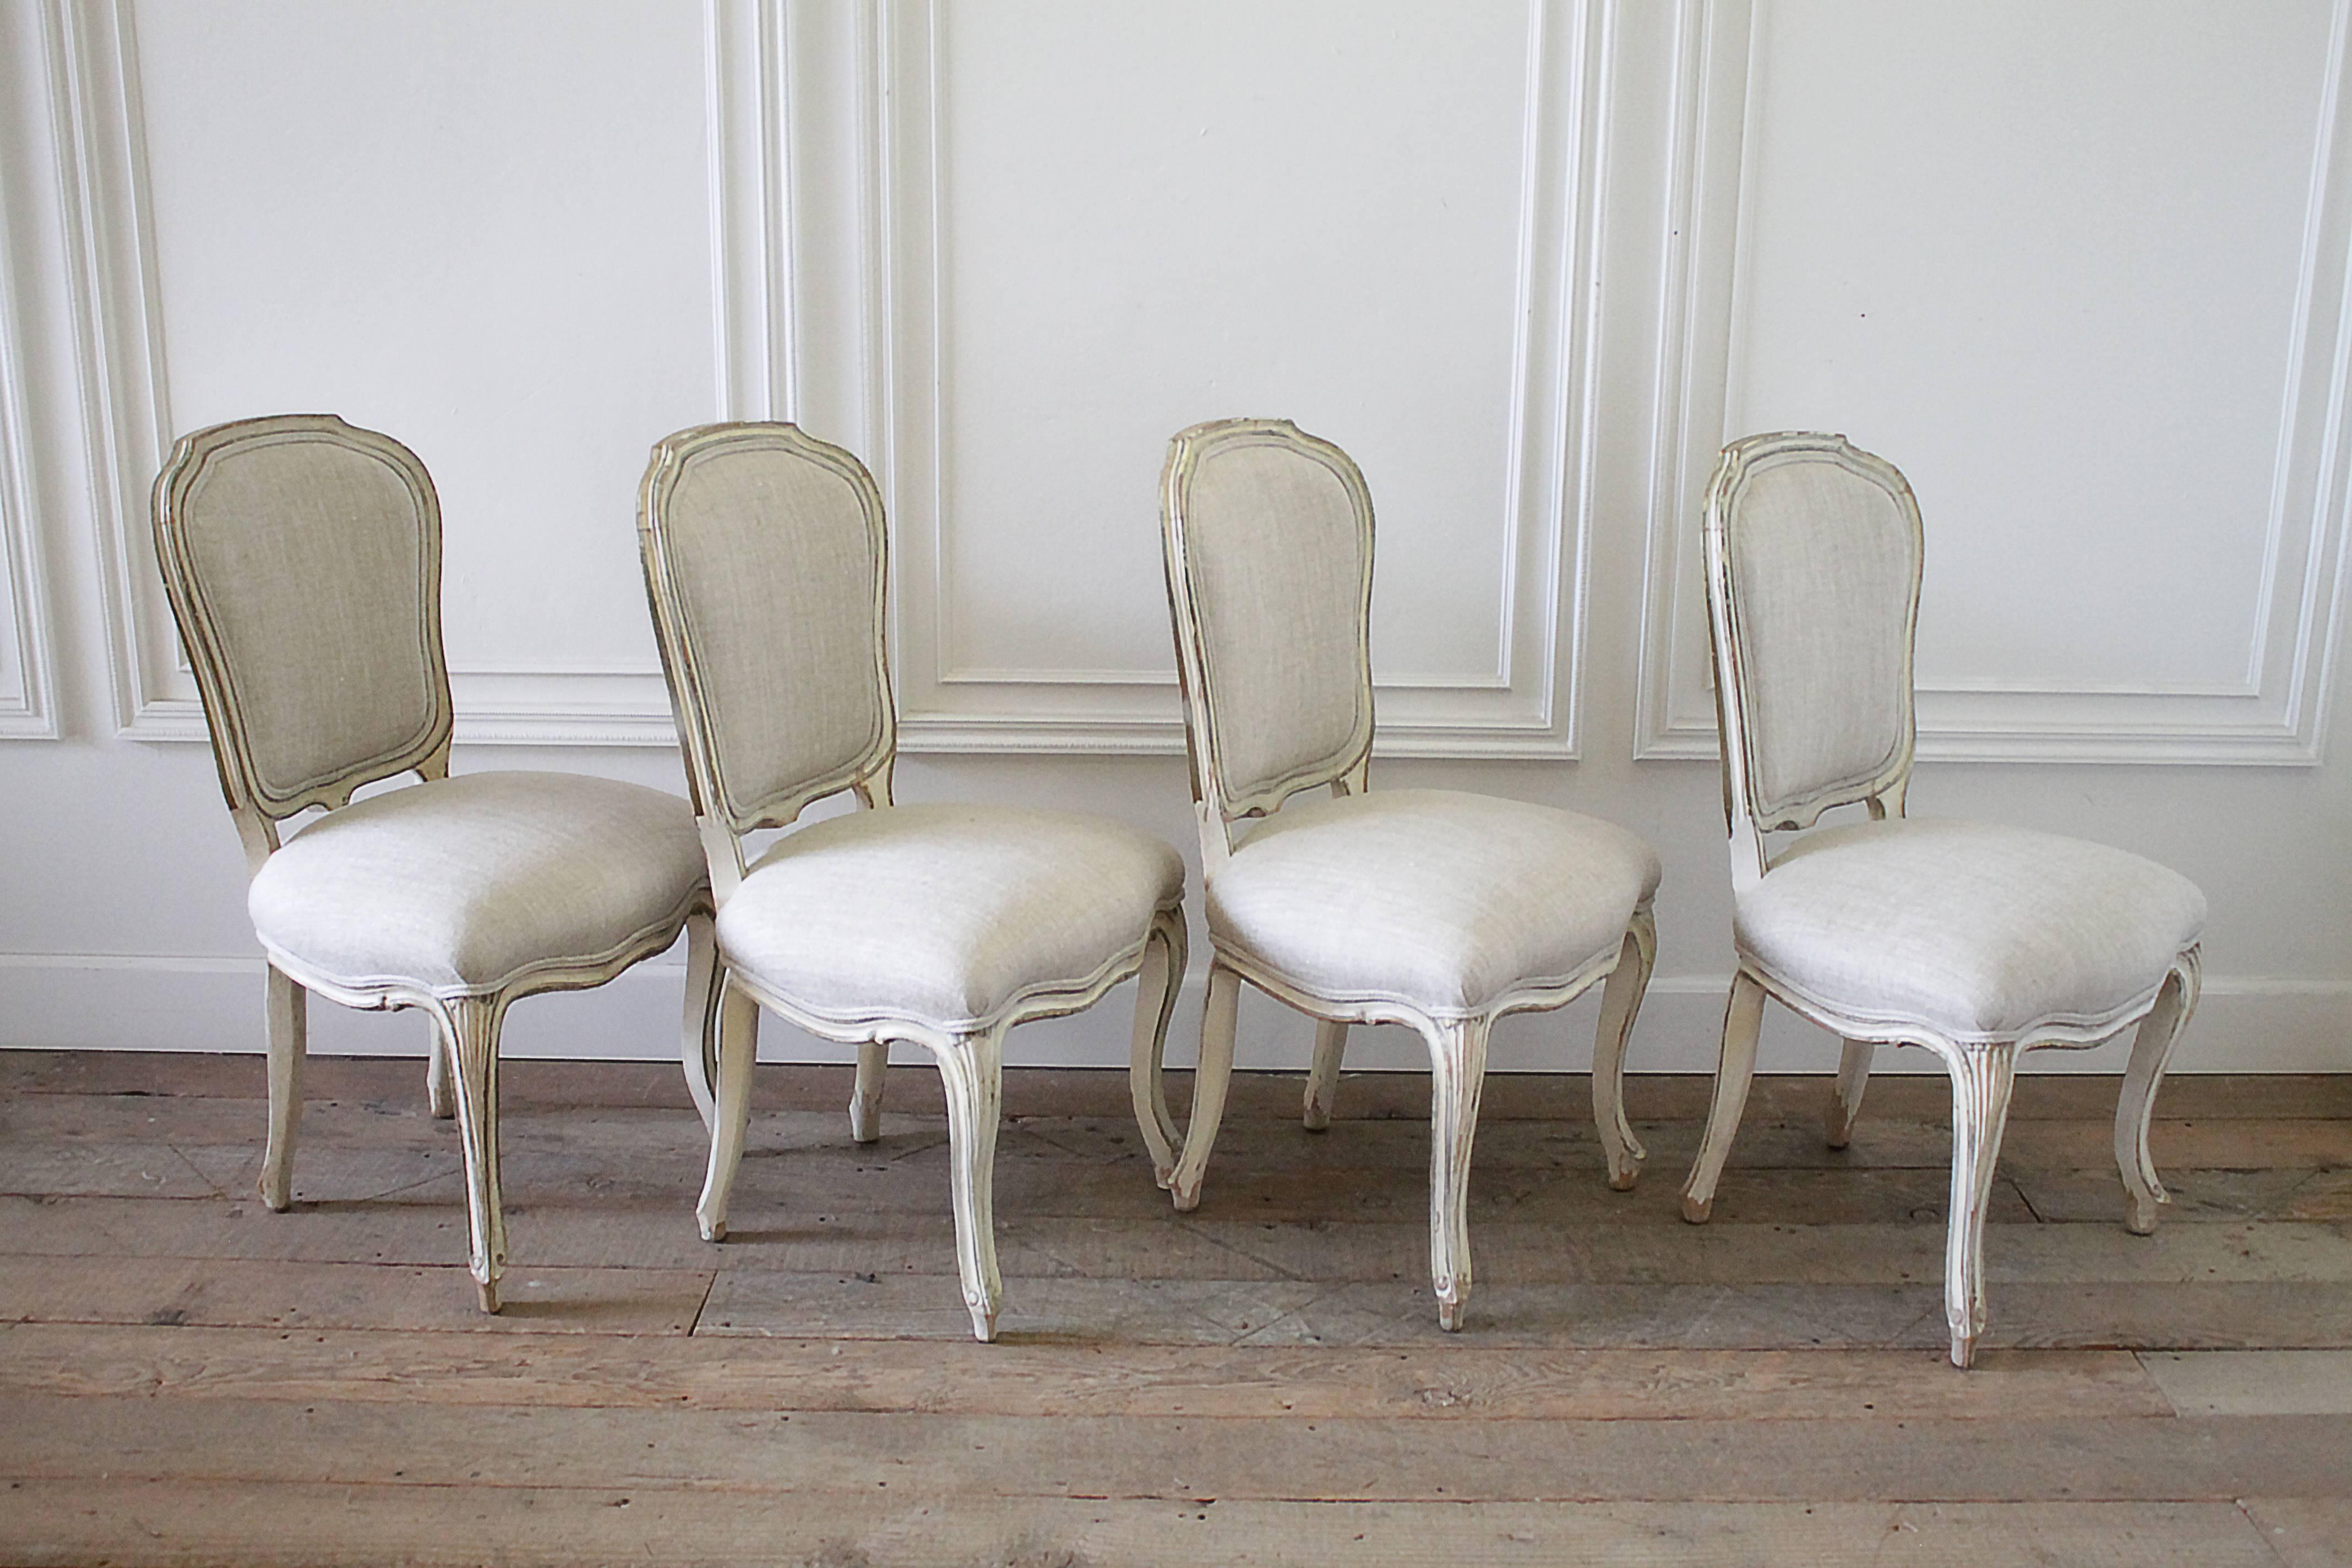 20th Century Set of Four Painted Louis XV Style Dining Chairs in Irish Linen